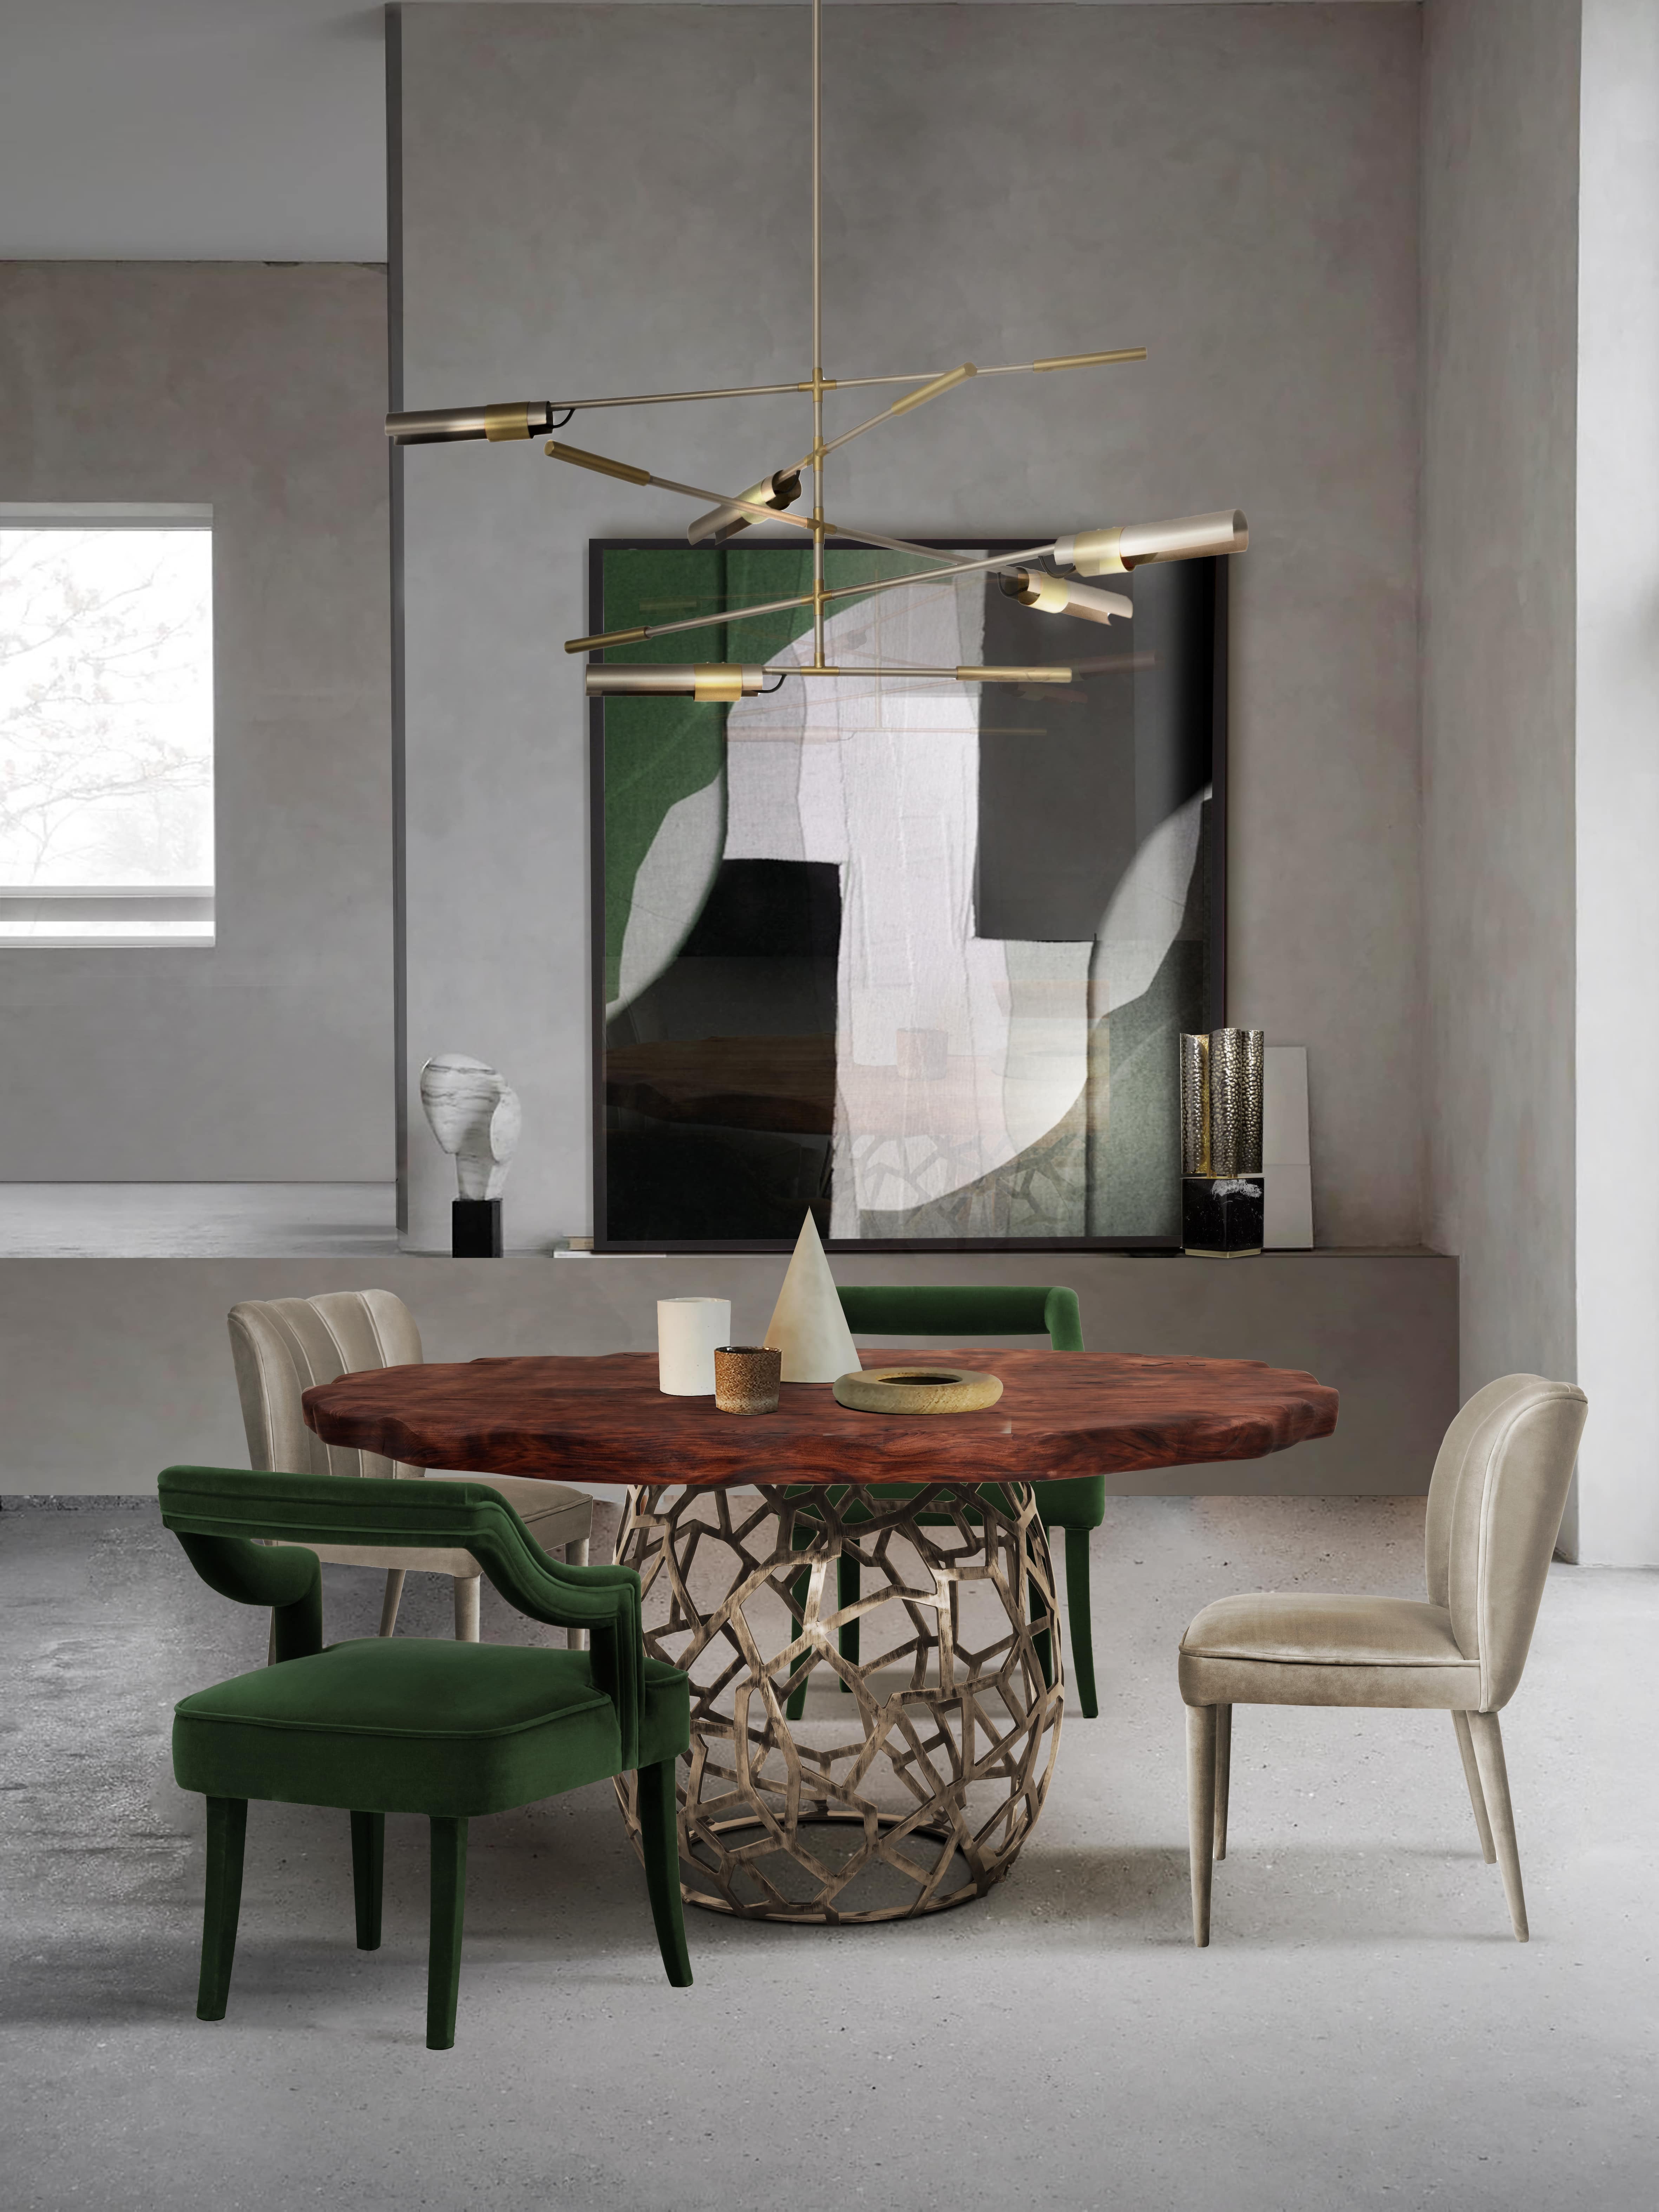 Inviting and Warm Modern Dining Room Decor with Round Wood Dining Table and Velvet Dining Chair - Home'Society